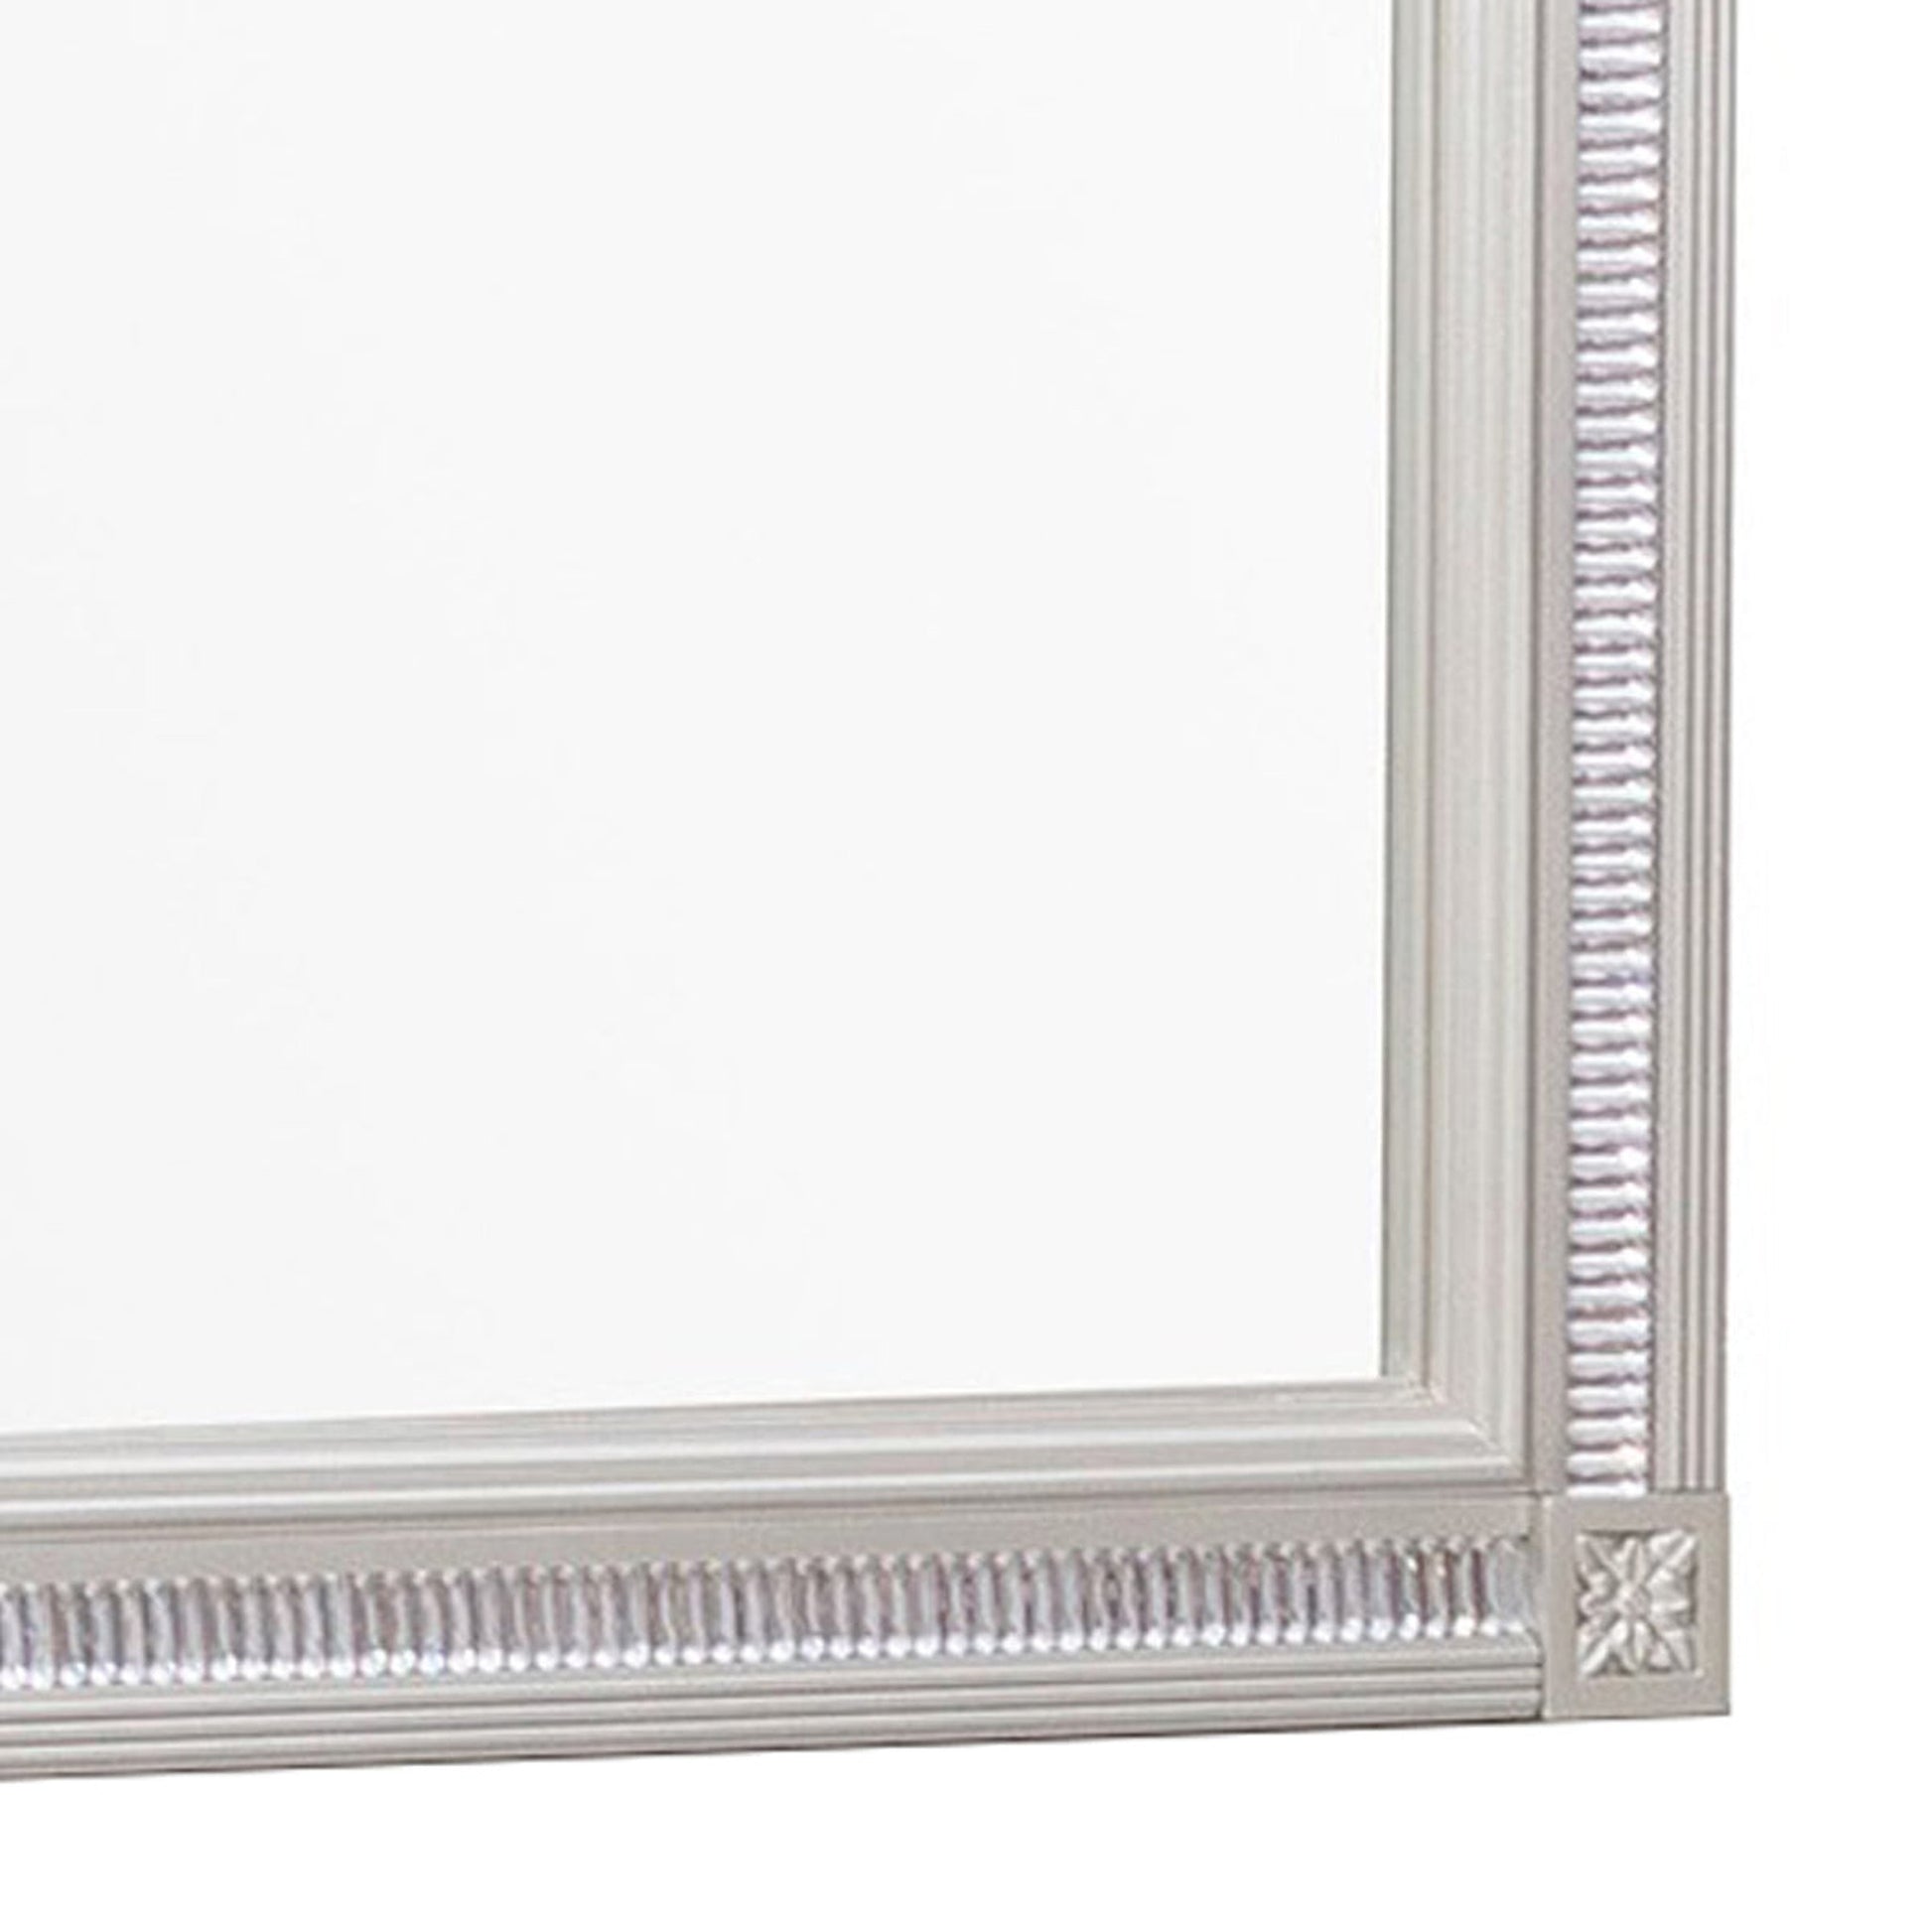 Benzara Silver Wooden Square Mirror With Carvings and Bevelled Edges